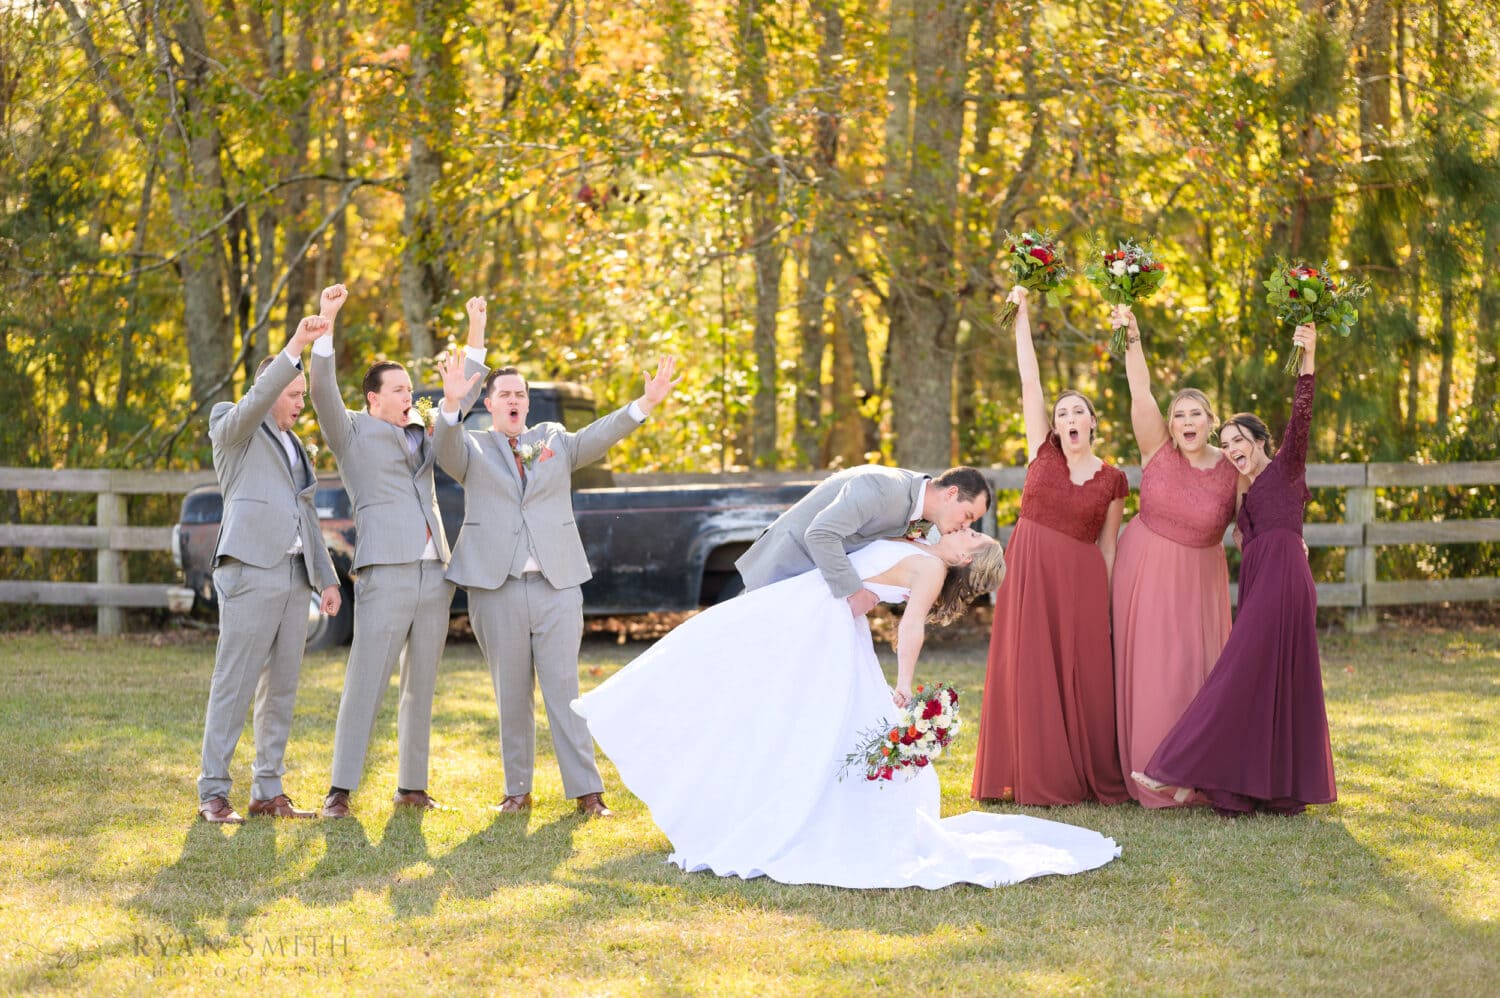 Wedding party cheering for bride and groom kiss - The Blessed Barn